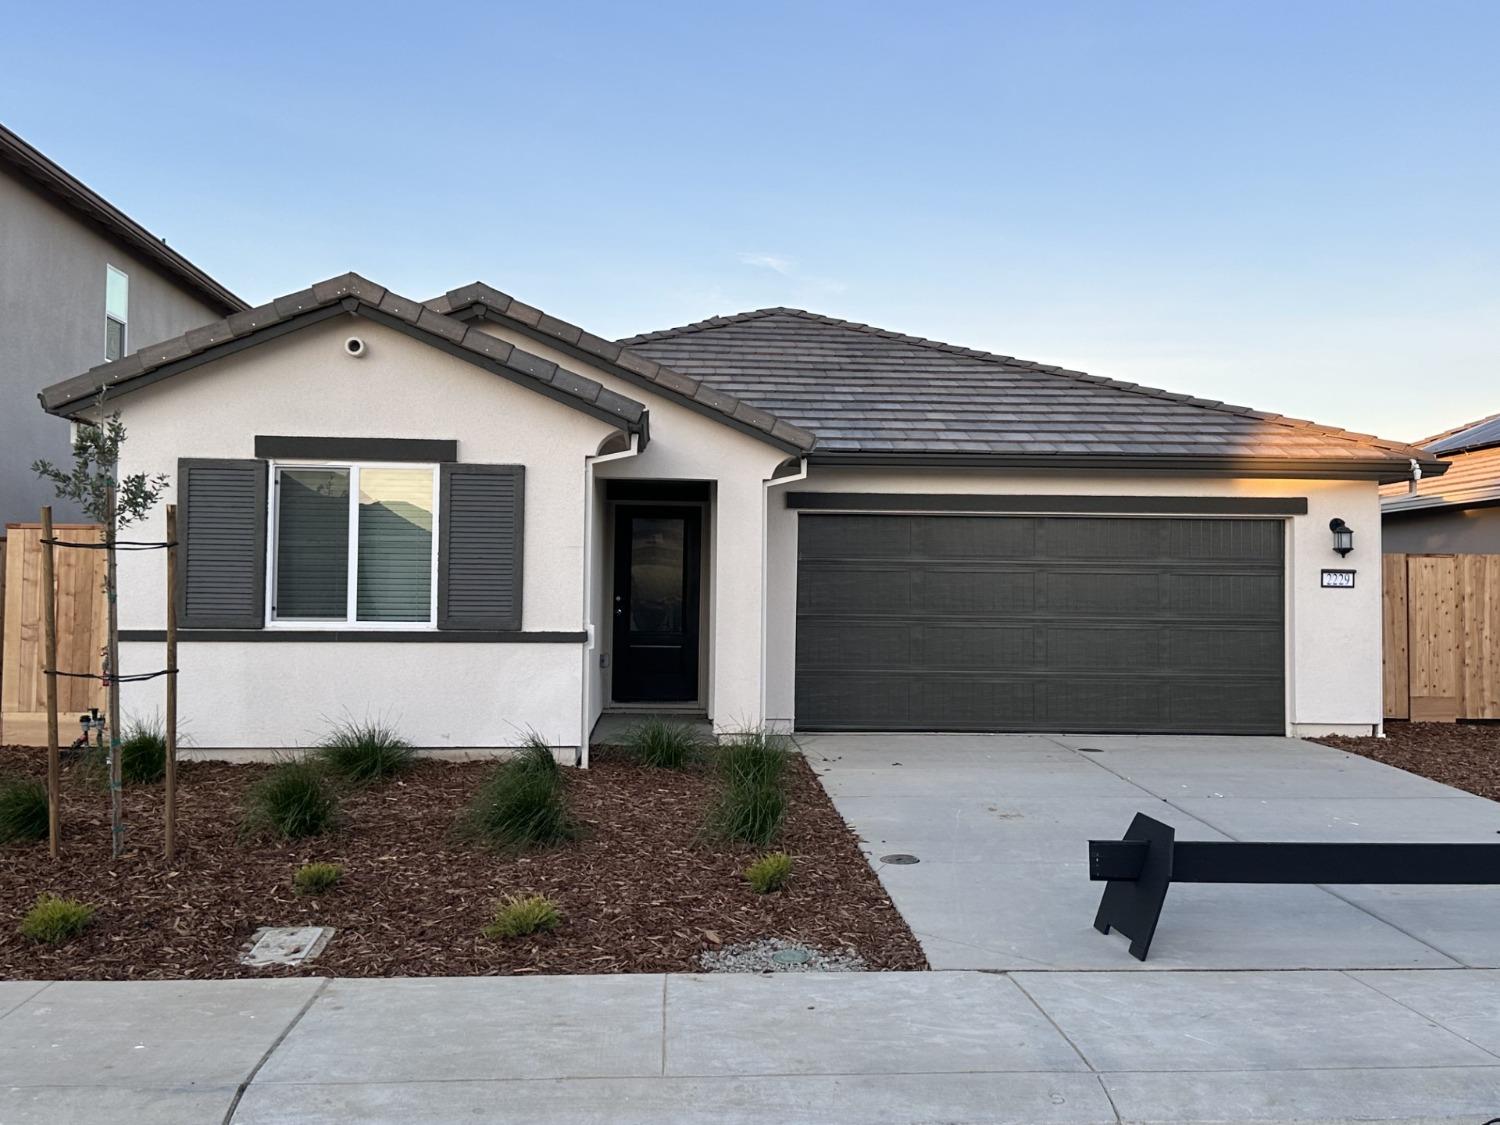 Photo of 2224 Sunshine Dr in Newman, CA